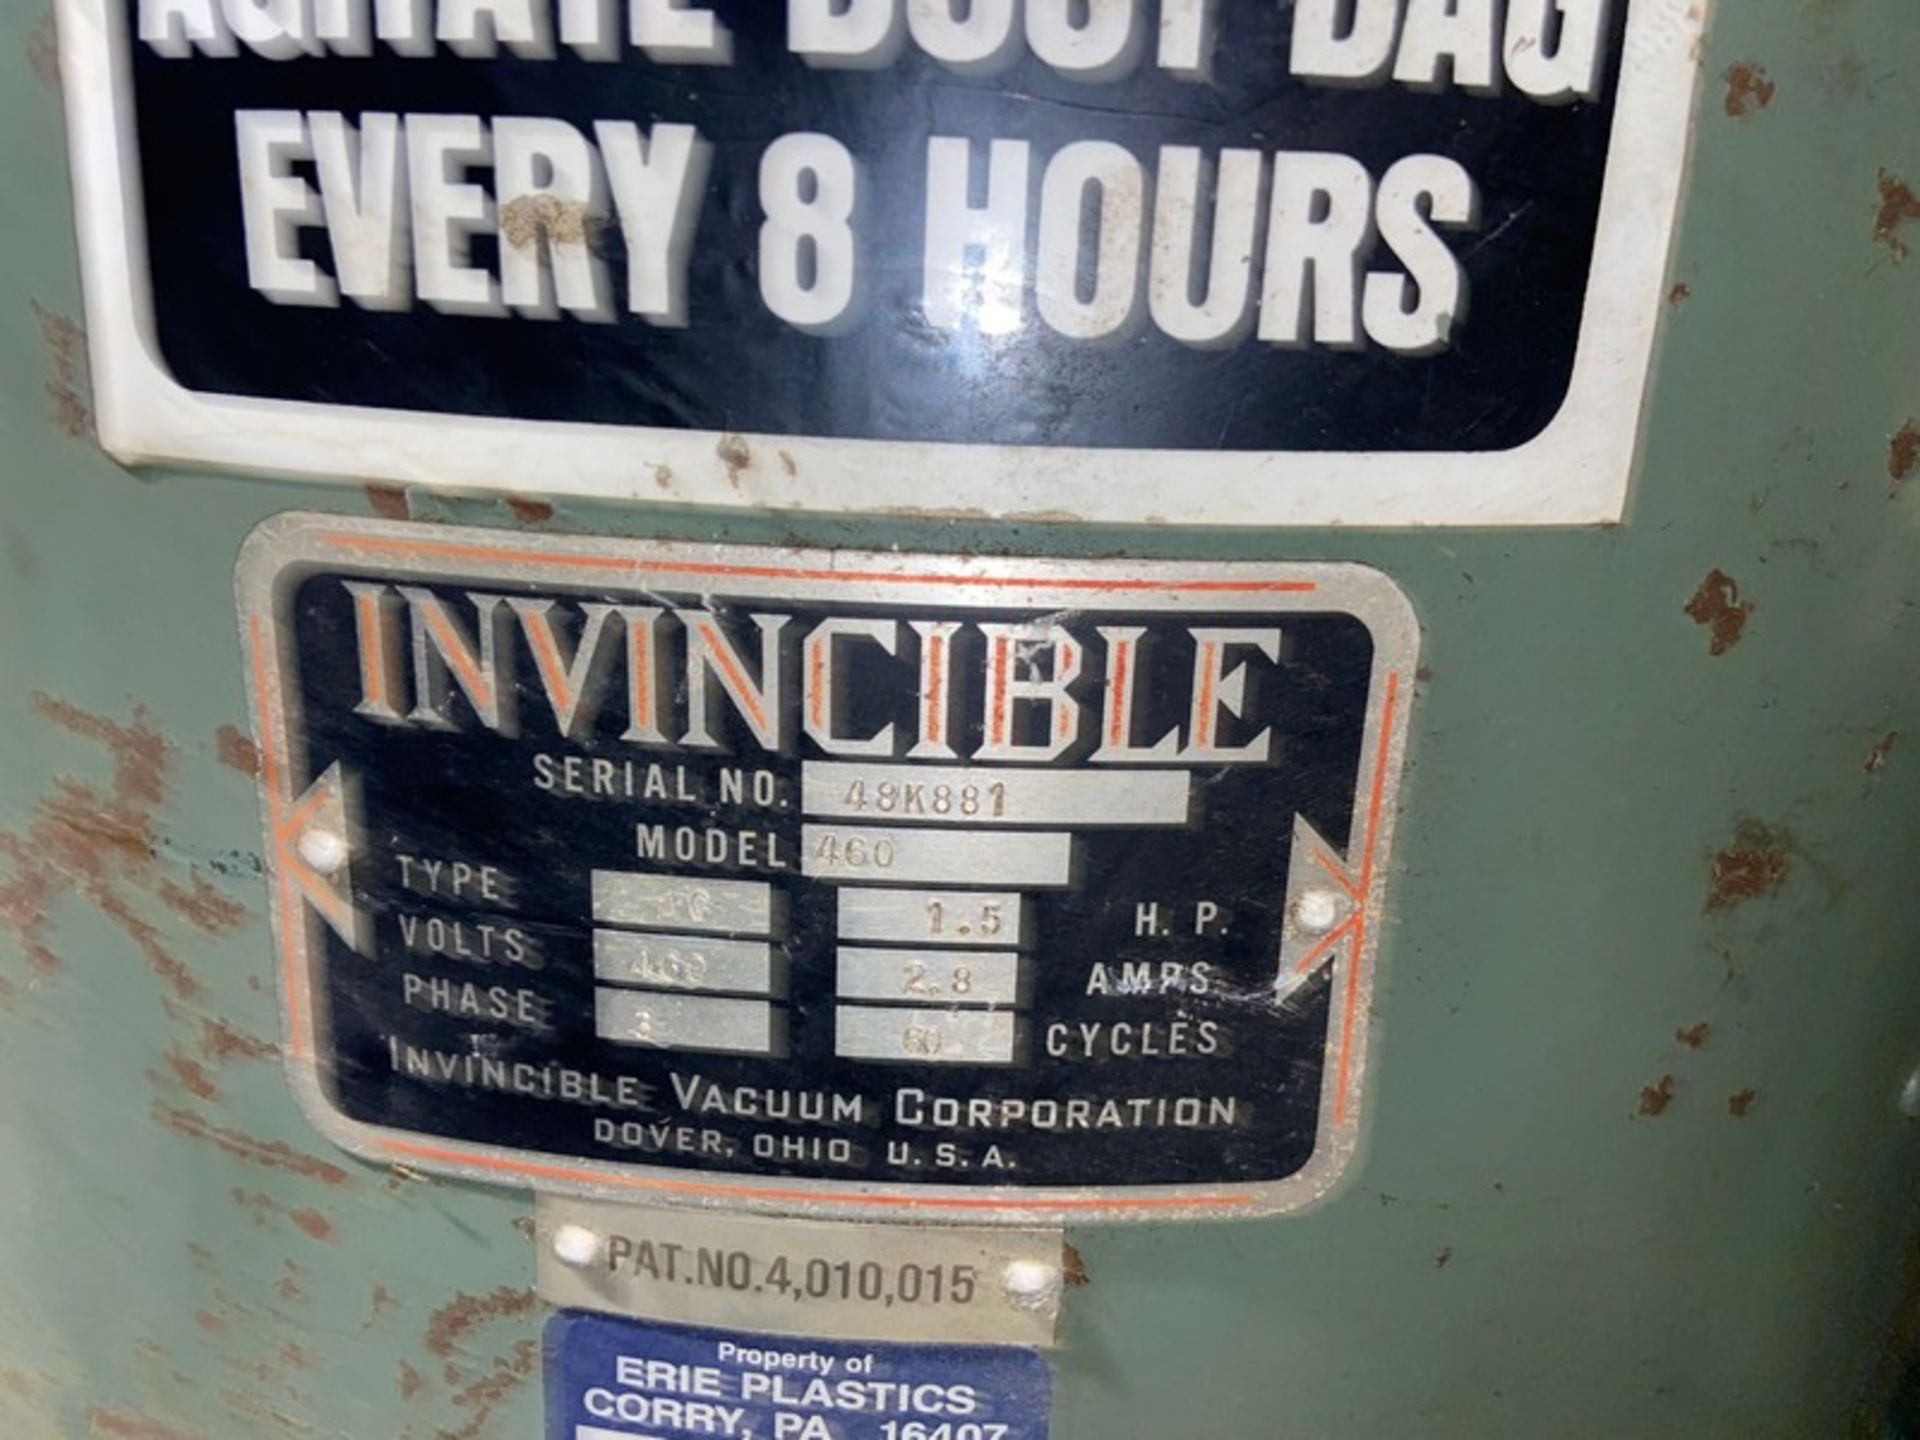 Invincible Portable Dust Collector, M/N 460, S/N 48K881, 460 Volts, 3 Phase (LOCATED IN CORRY, PA) - Bild 4 aus 4